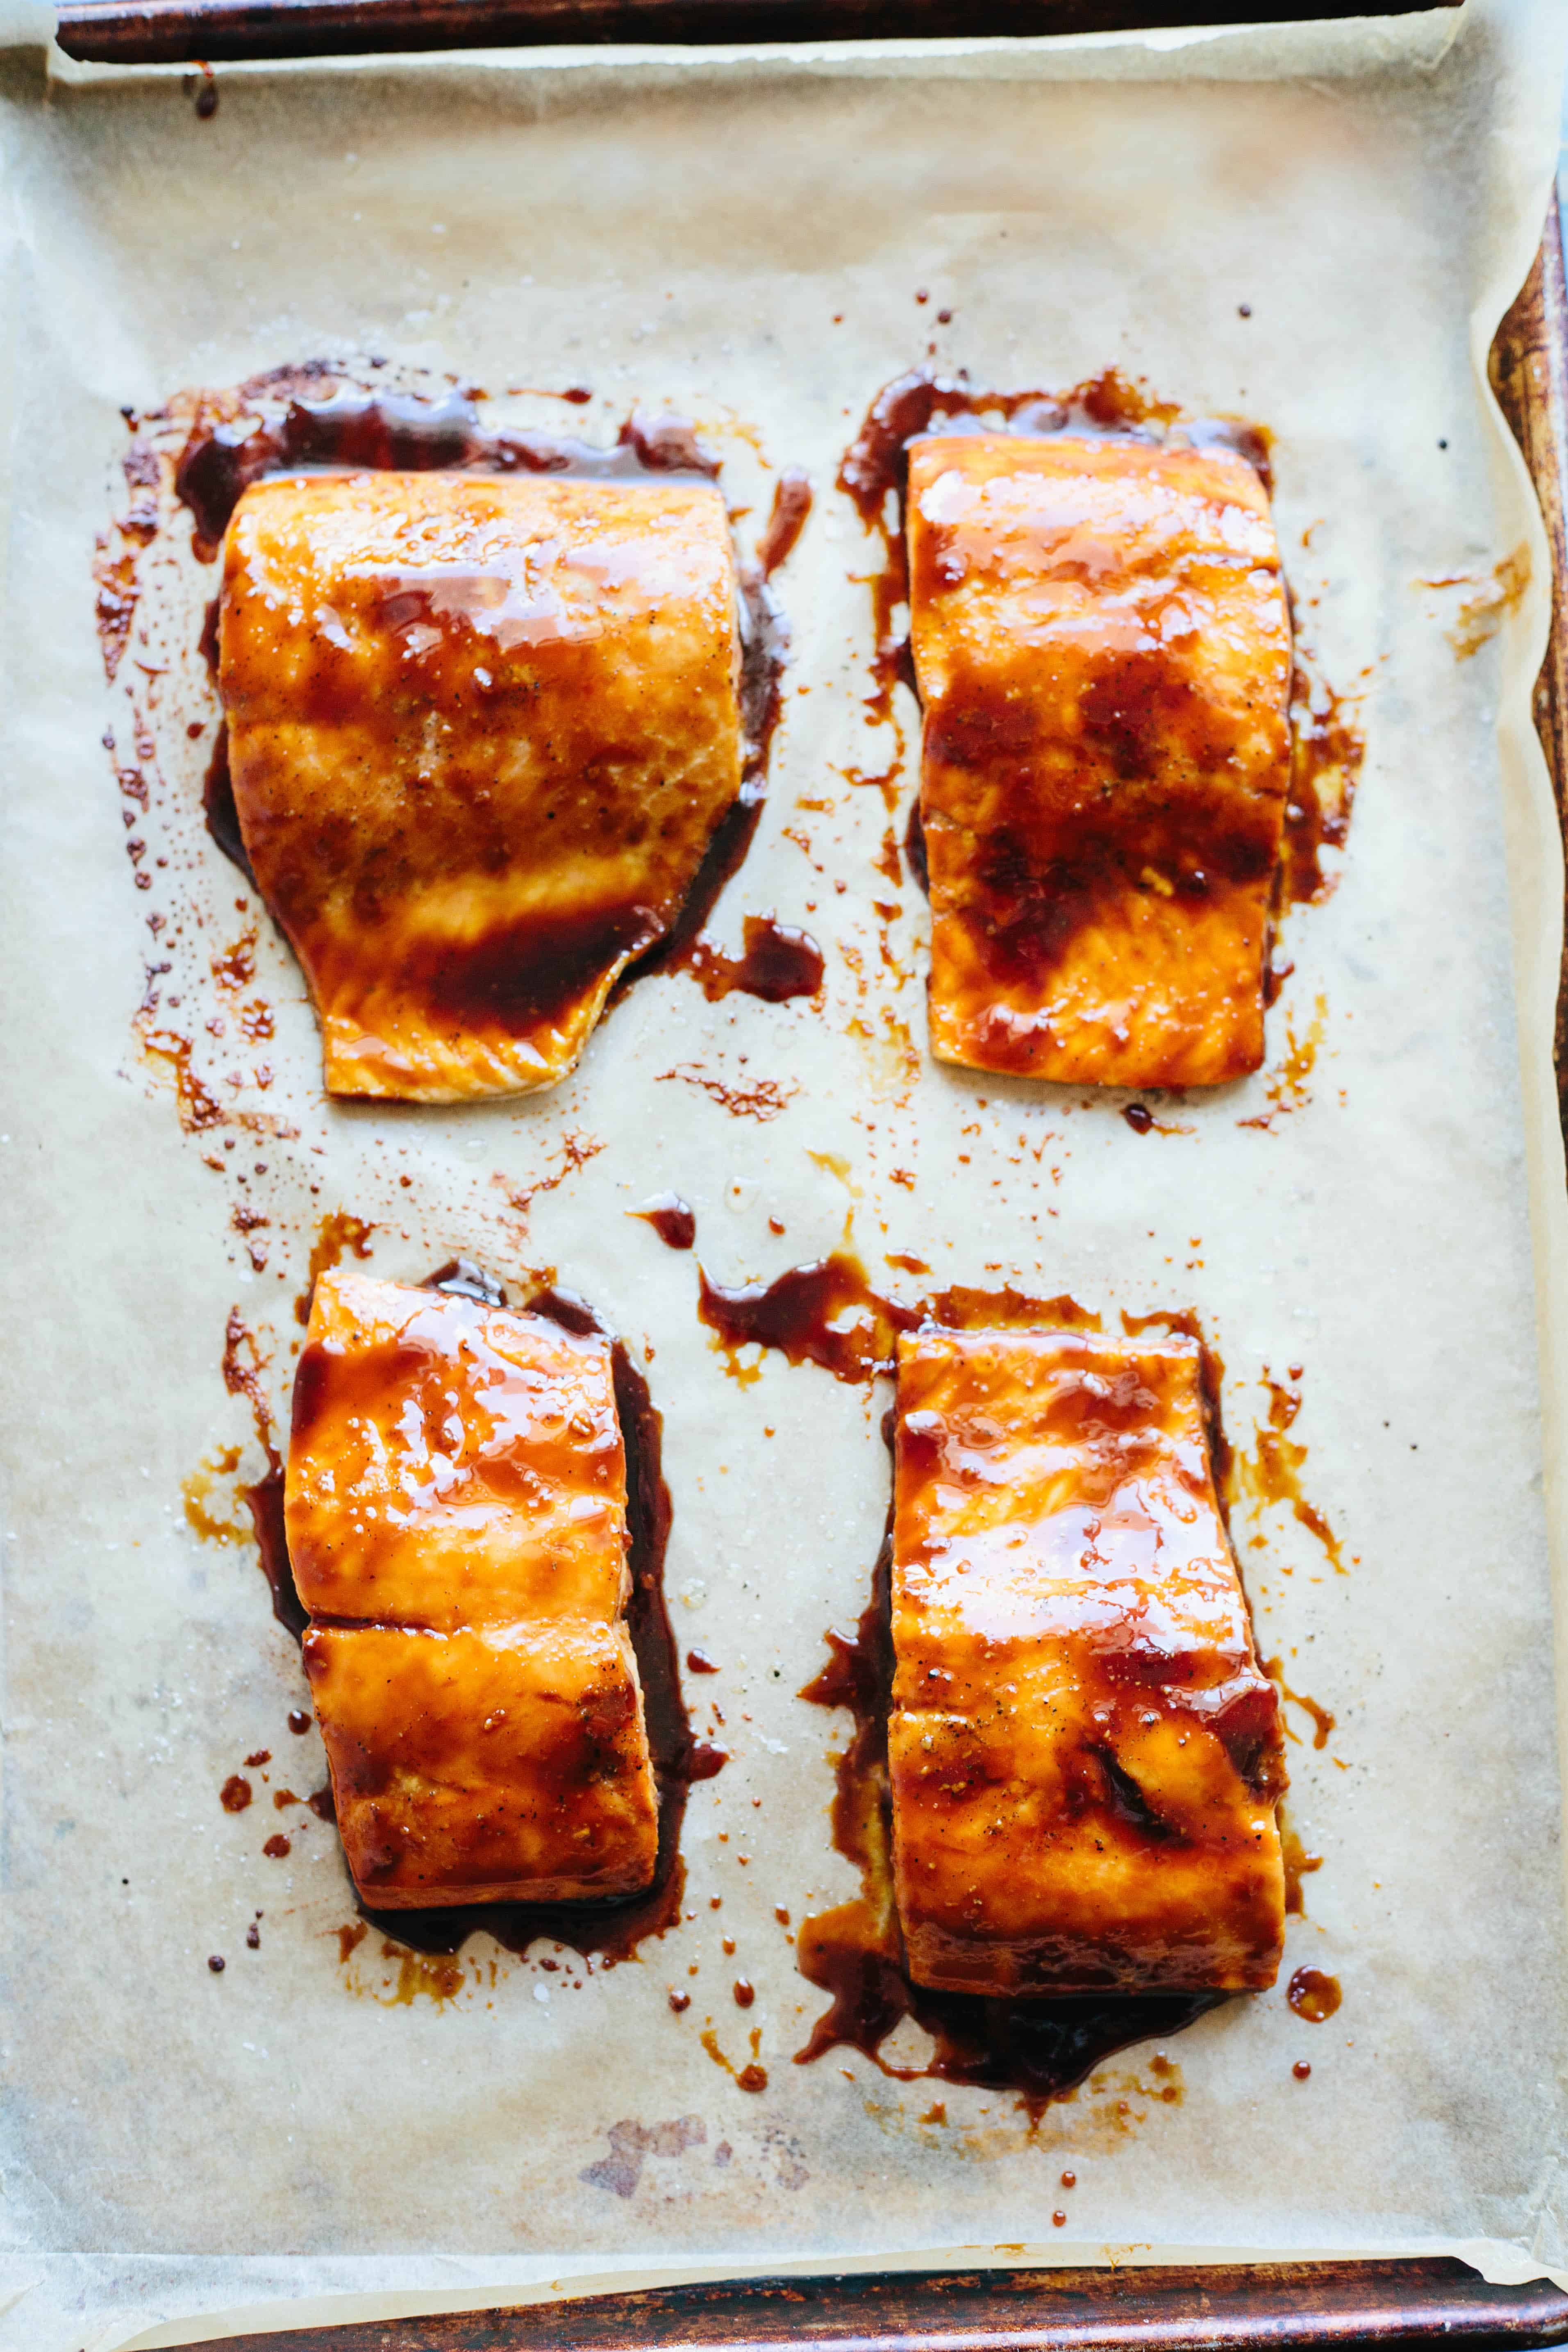 Four soy-glazed salmon filets on a parchment-lined baking sheet.